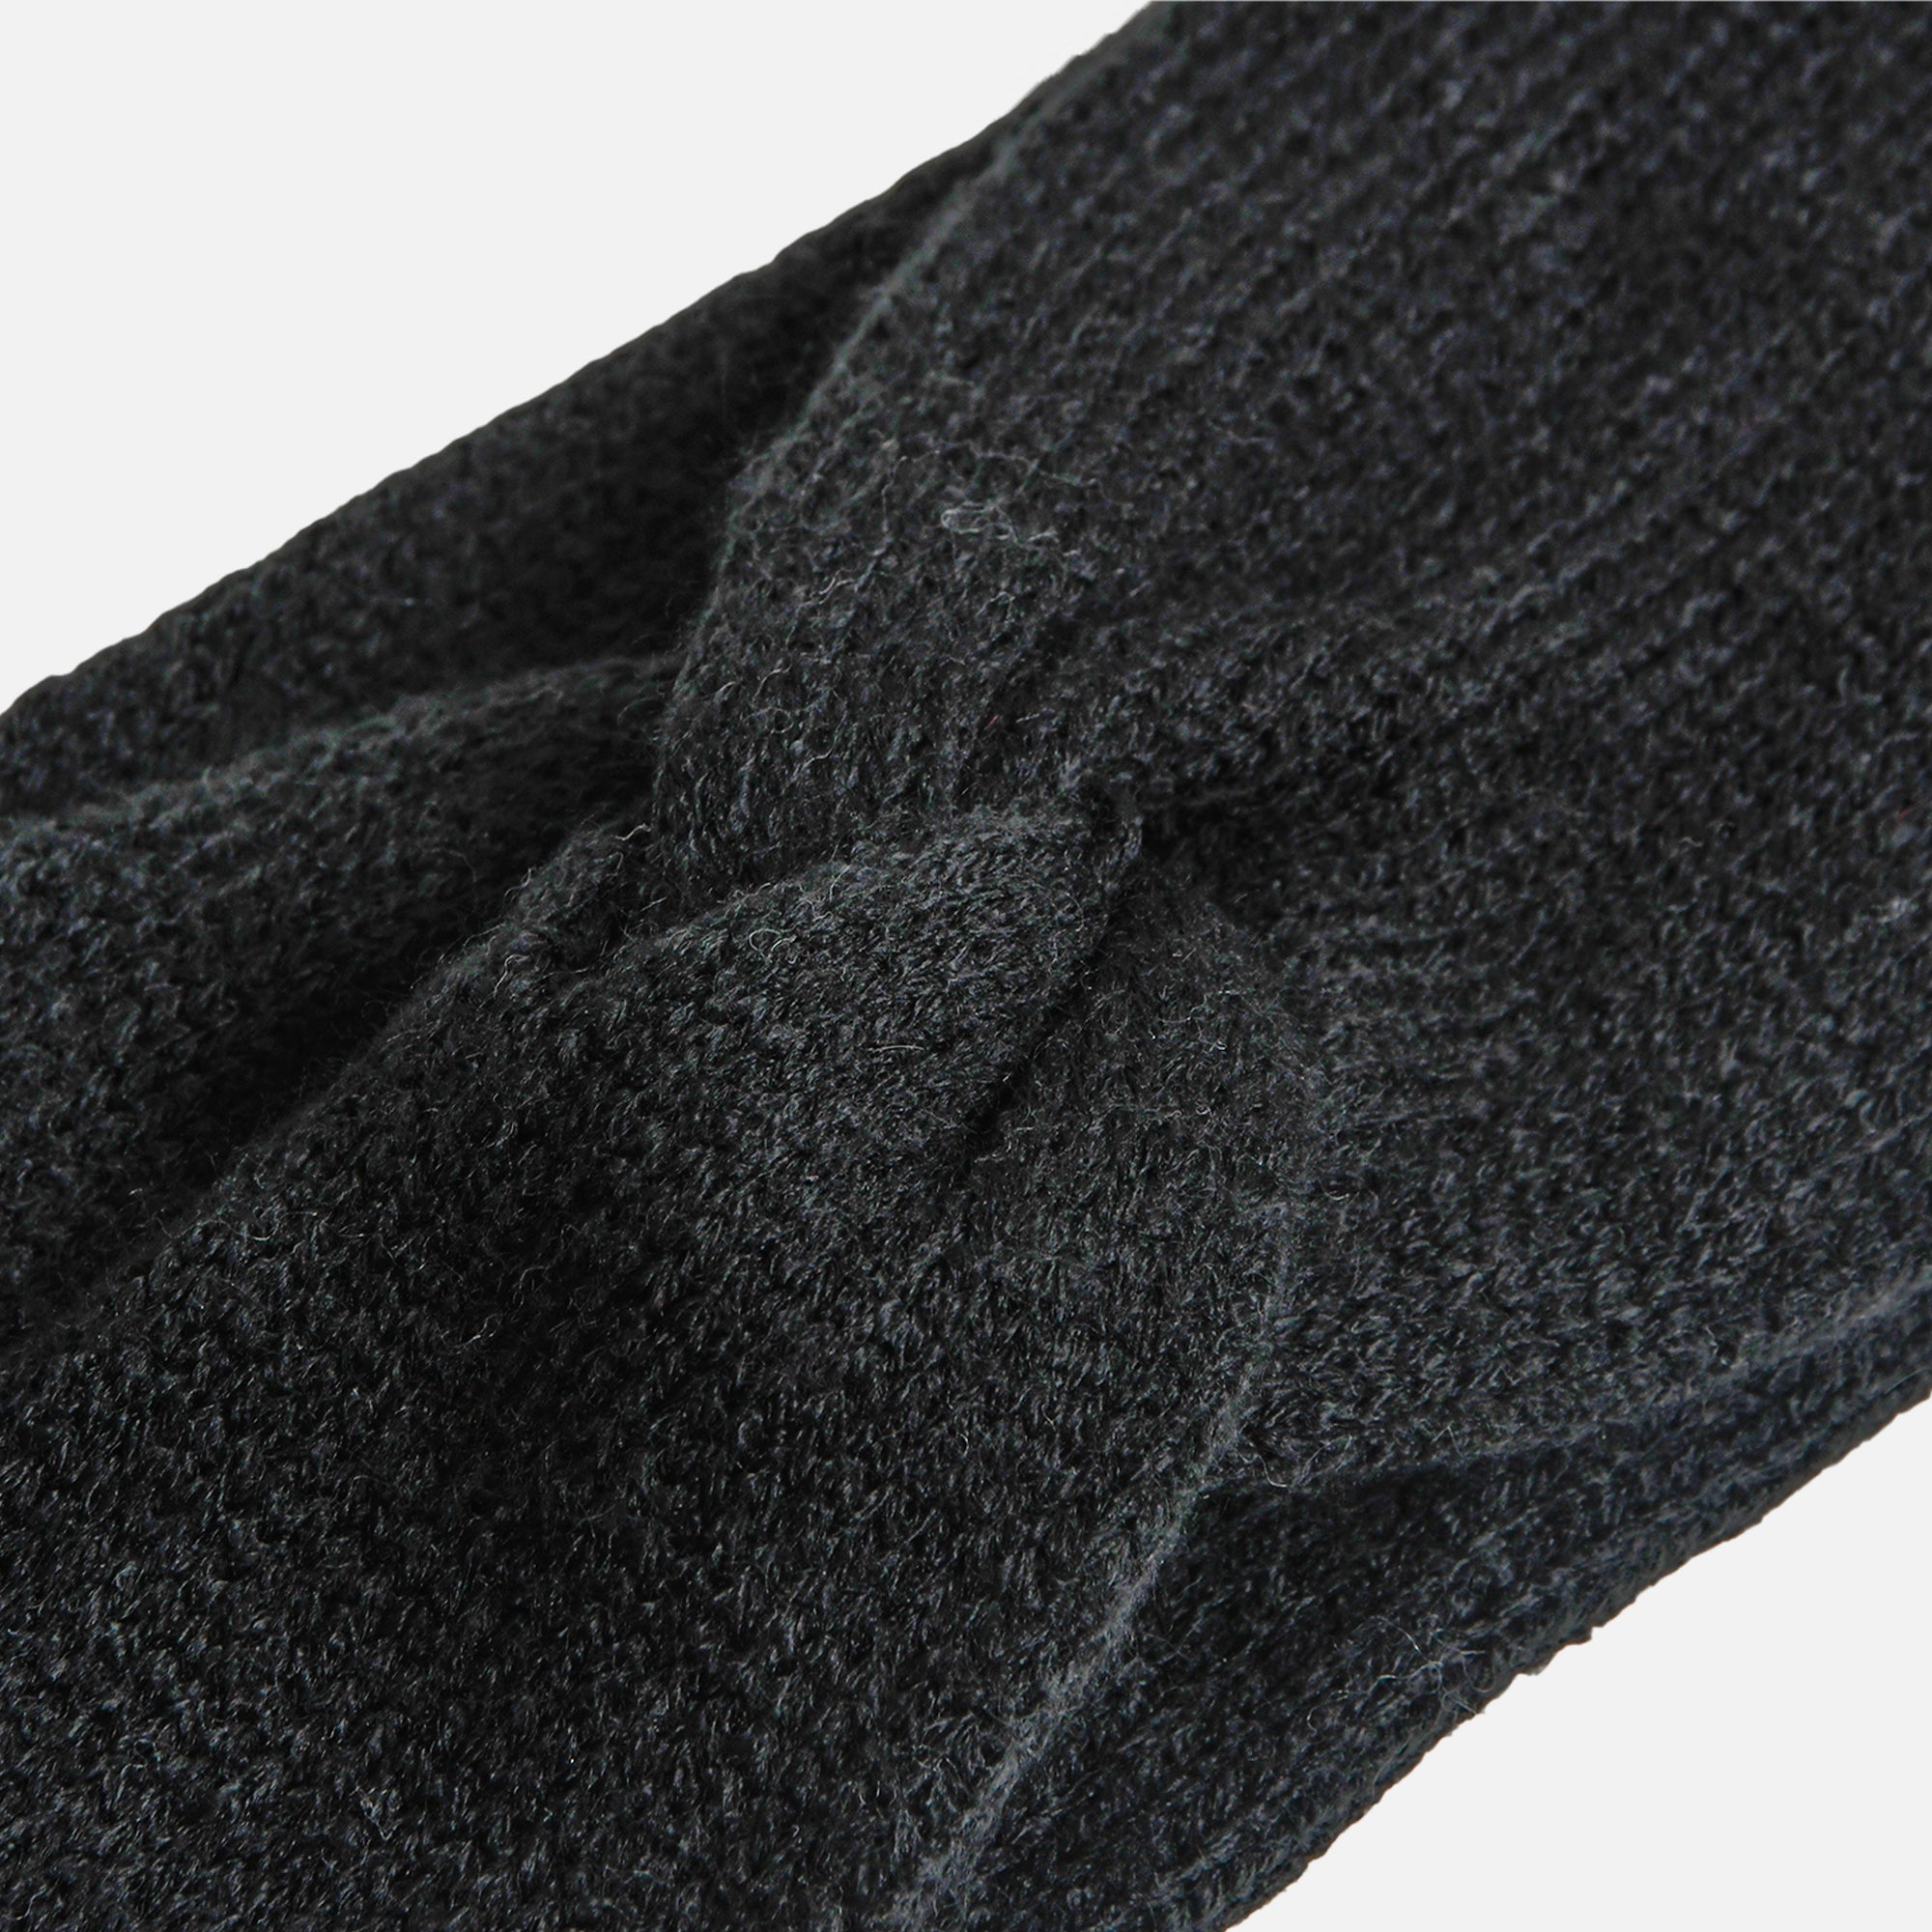 Black twisted knitted headband with knot